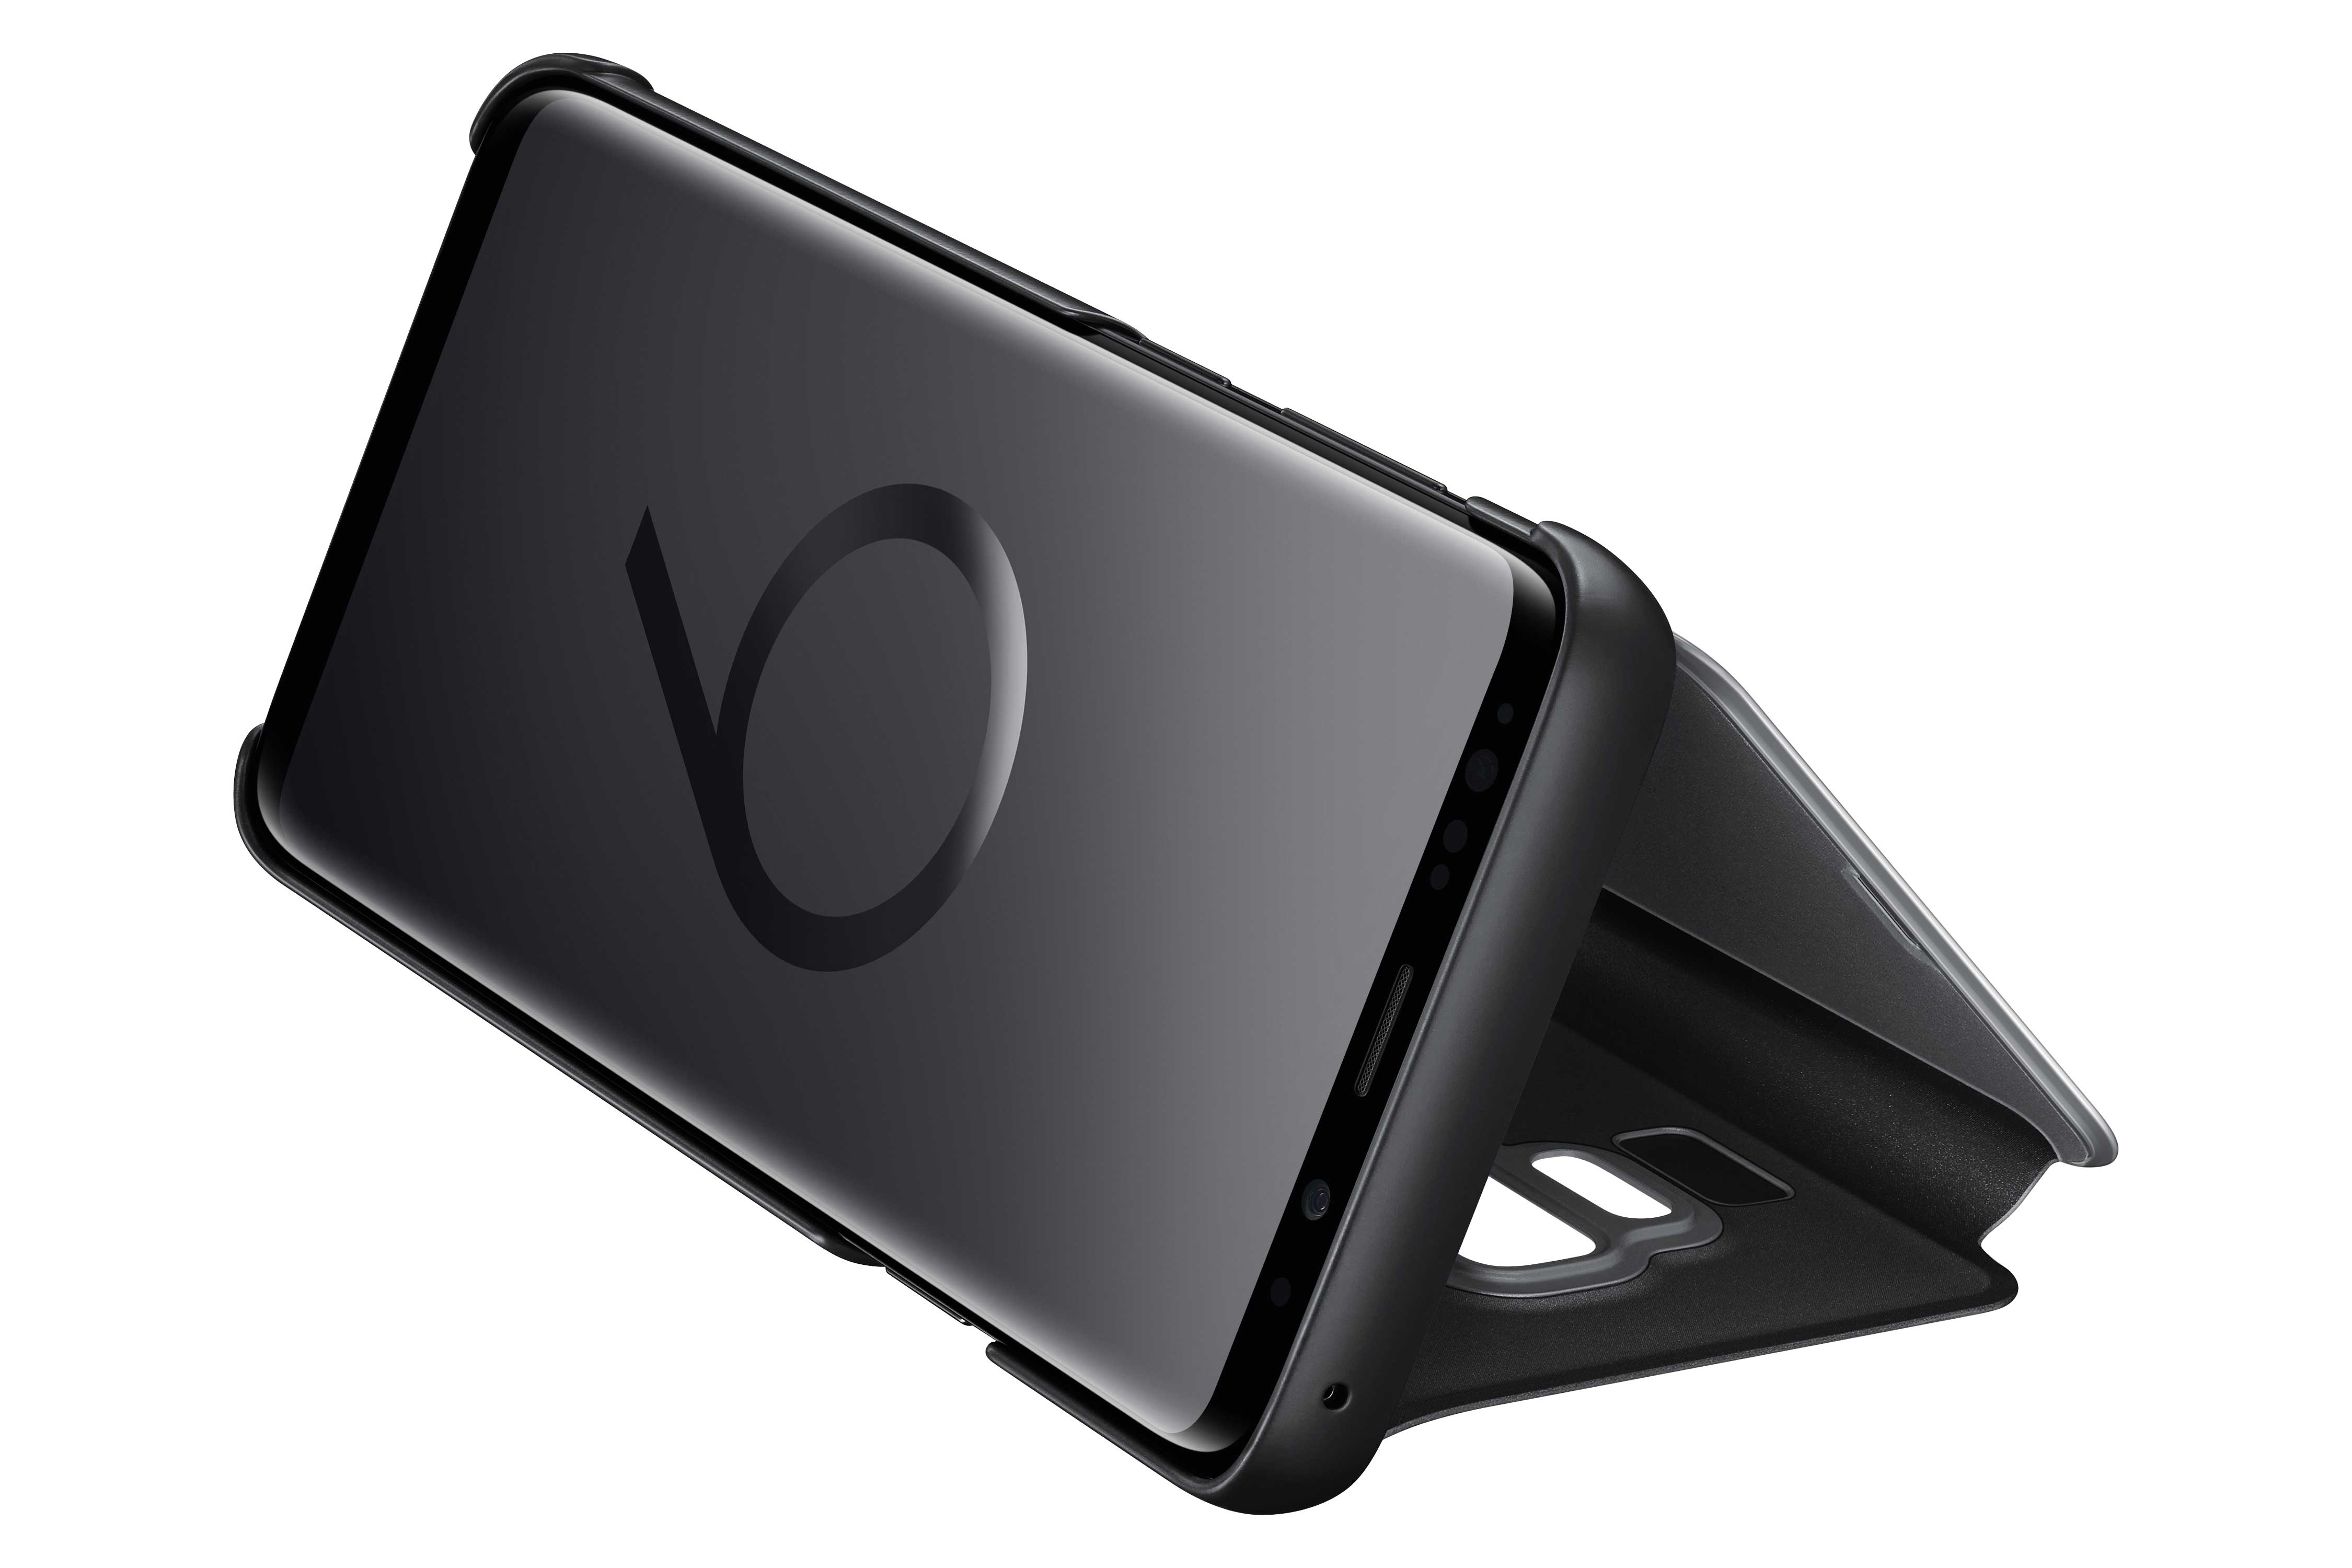 Clear View Standing Cover (Black)